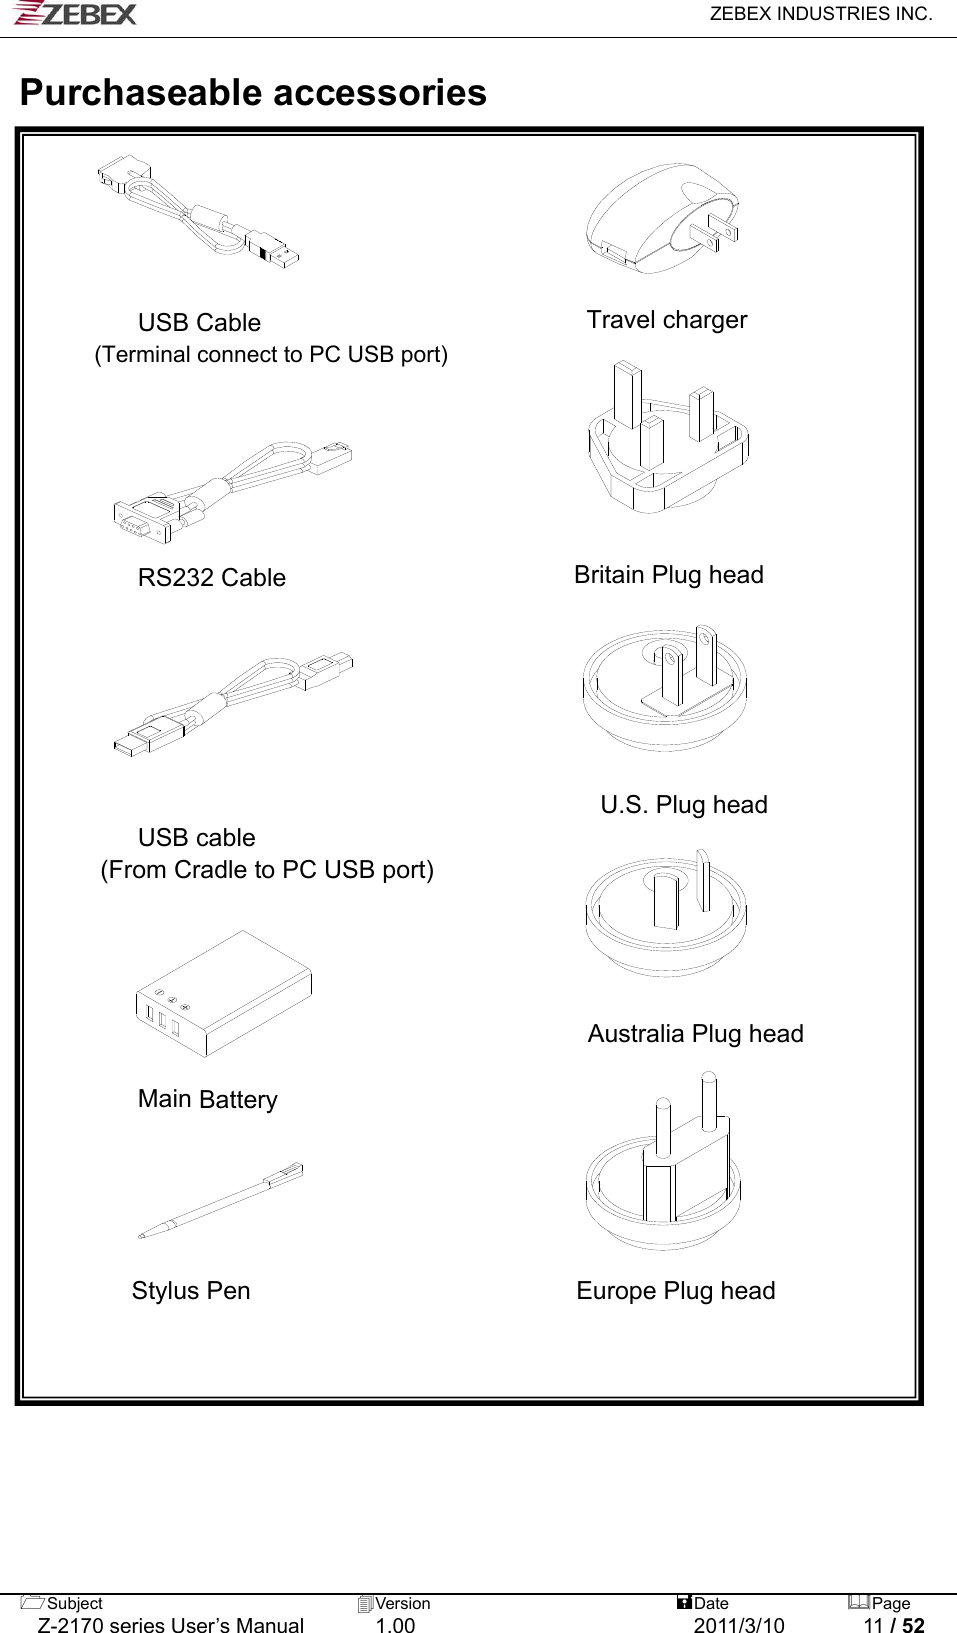   ZEBEX INDUSTRIES INC.  Subject  Version   DatePage   Z-2170 series User’s Manual  1.00  2011/3/10  11 / 52  Purchaseable accessories         USB Cable                          Travel charger         (Terminal connect to PC USB port)                                                                               RS232 Cable                       Britain Plug head                      U.S. Plug head         USB cable   (From Cradle to PC USB port)     Australia Plug head     Main Battery                             Stylus Pen                          Europe Plug head                             